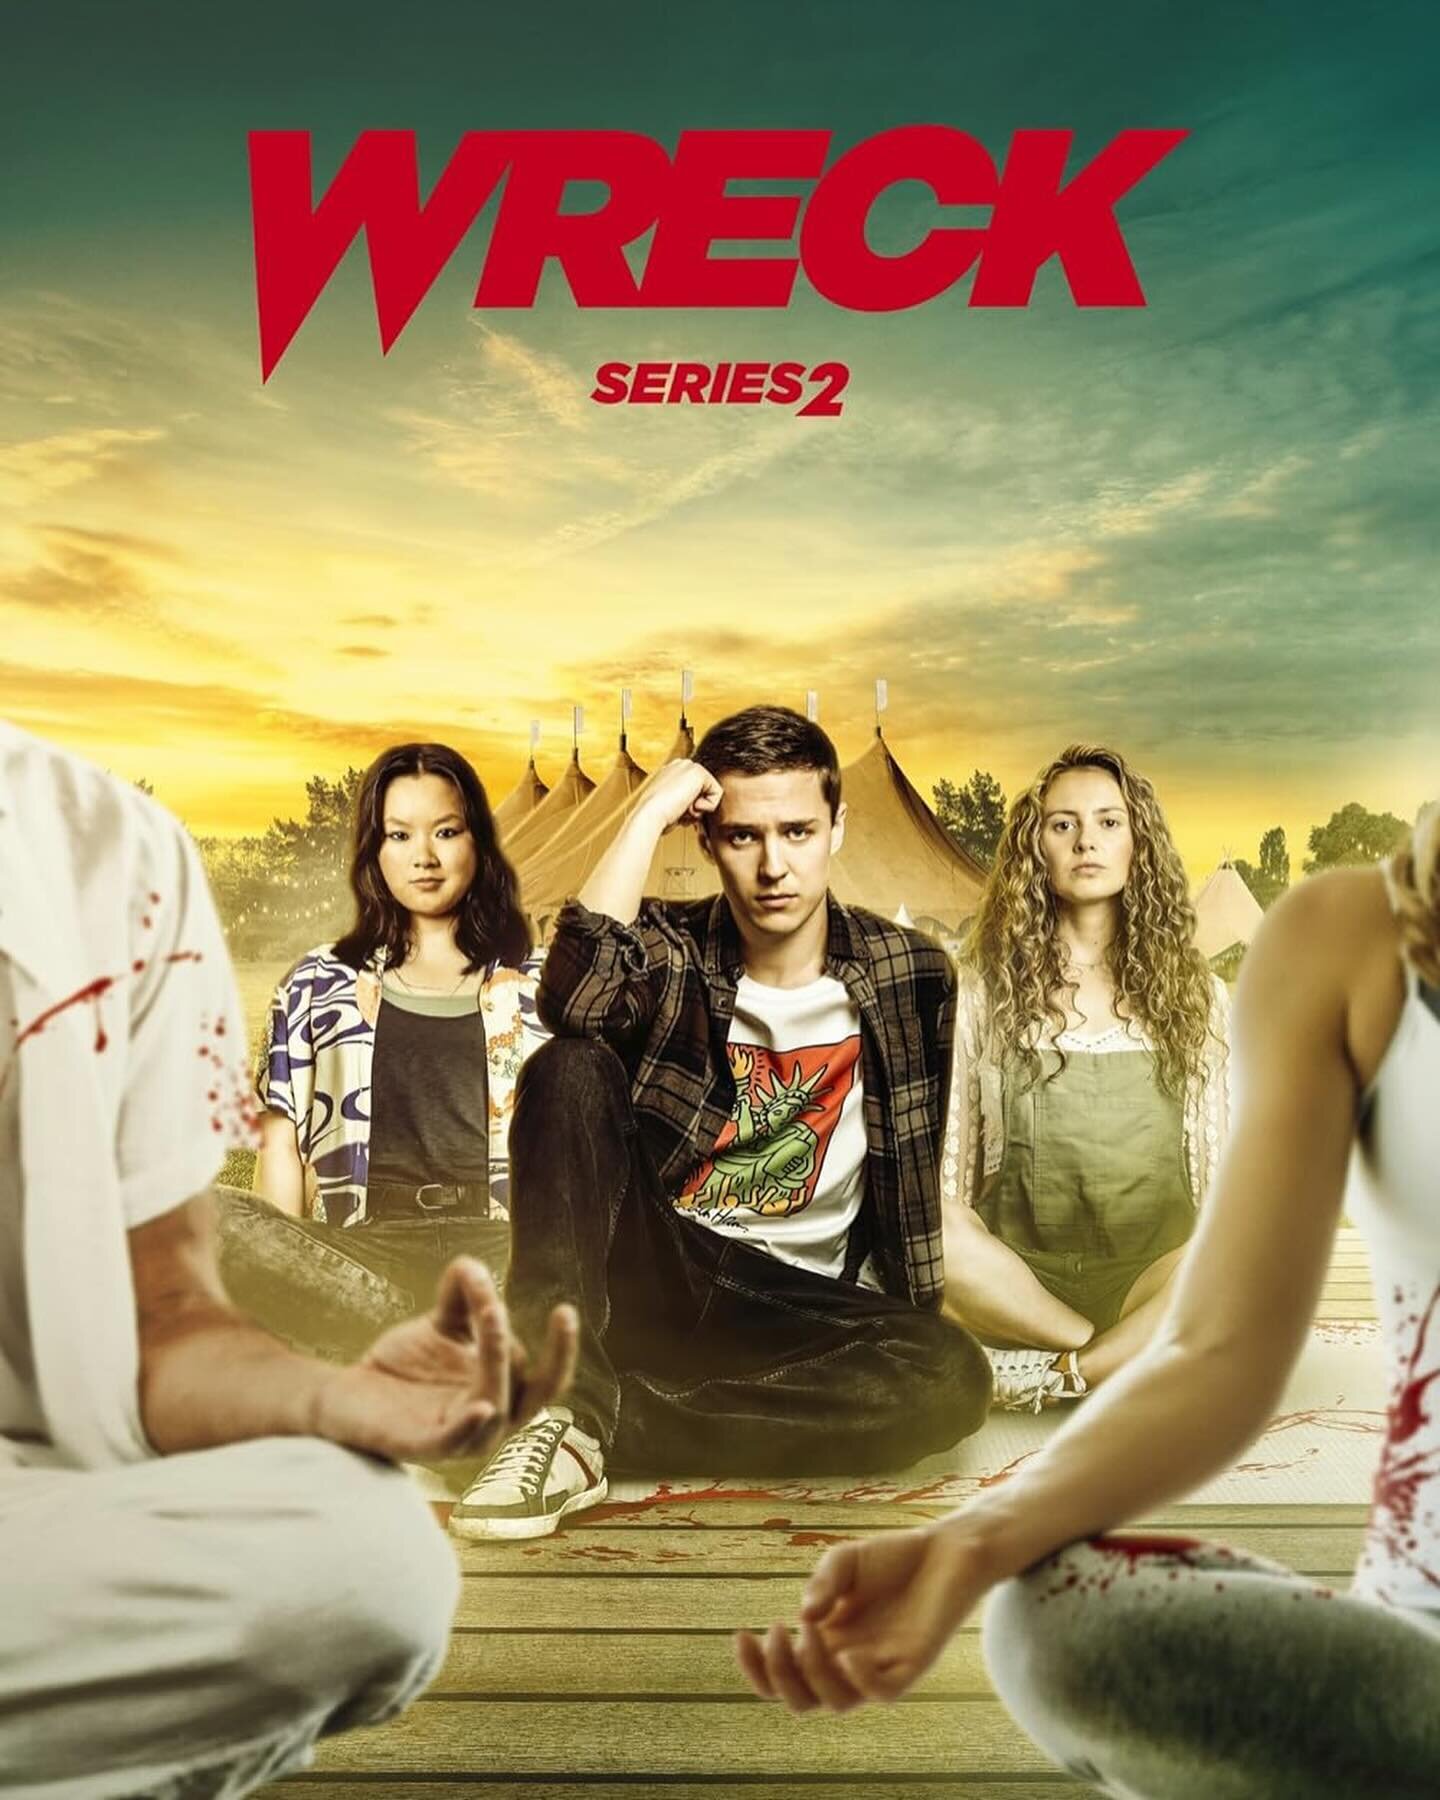 It&rsquo;s back 😳⁣
⁣
Wreck S2! ⁣
⁣
The critically acclaimed comedy horror is now available on @bbcthree &amp; @bbciplayer ⁣
⁣
TCG&rsquo;s Joel Elferink plays the role of Steve Garrett. ⁣
⁣
Cast by @louisekielycasting ⁣
⁣
#Wreck2 #bbciplayer @joelelf